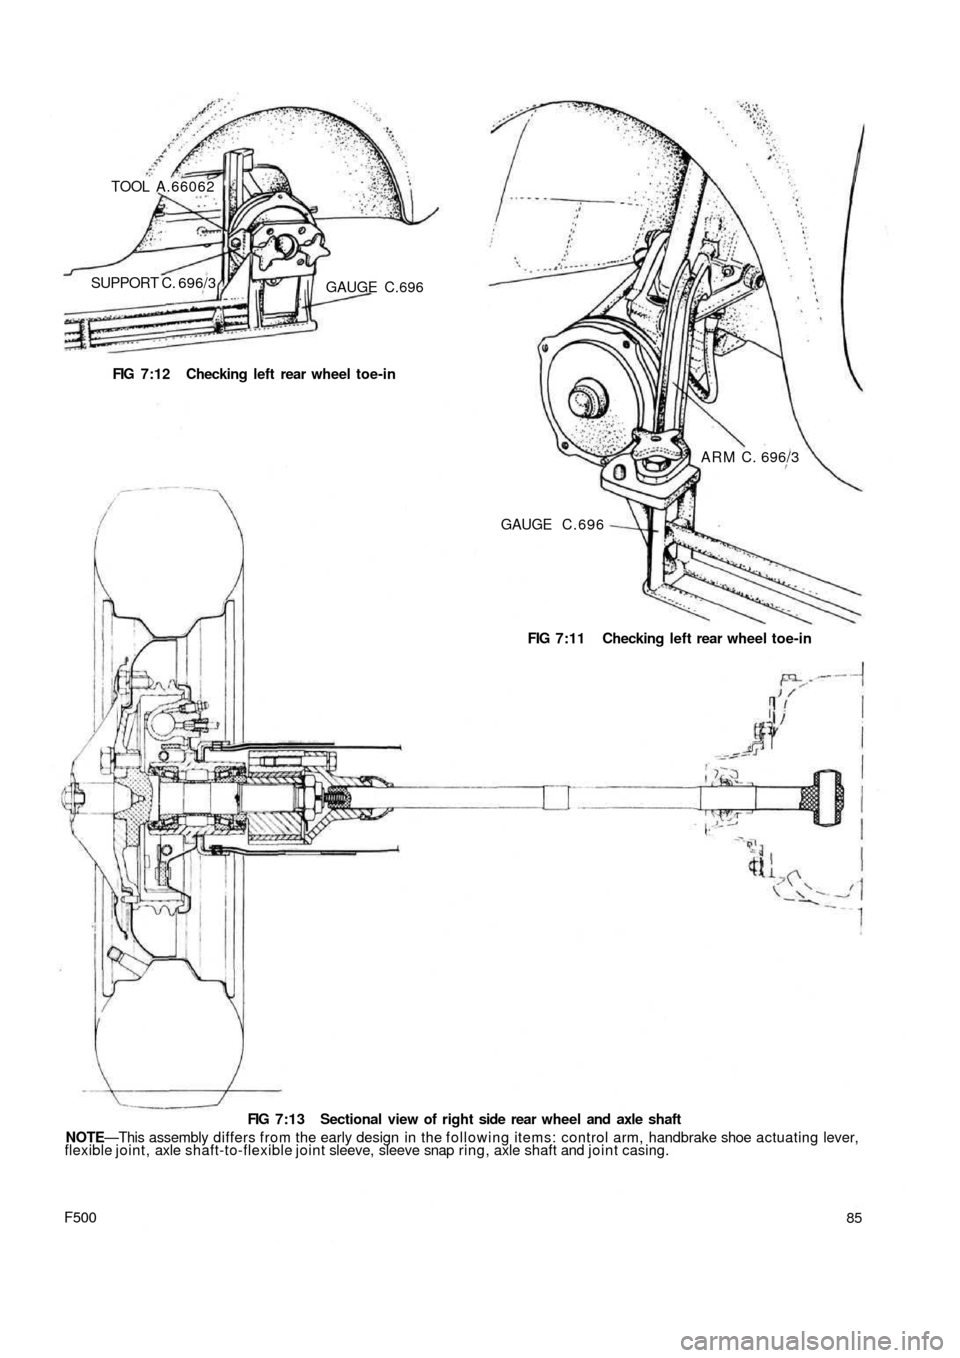 FIAT 500 1971 1.G Workshop Manual TOOL A.66062
SUPPORT C. 696/3GAUGE C.696
FIG 7:12 Checking left rear wheel toe-in
ARM C. 696/3
GAUGE C . 6 9 6
FIG 7:11 Checking left rear wheel toe-in
F500
FIG 7:13 Sectional view of right side rear 